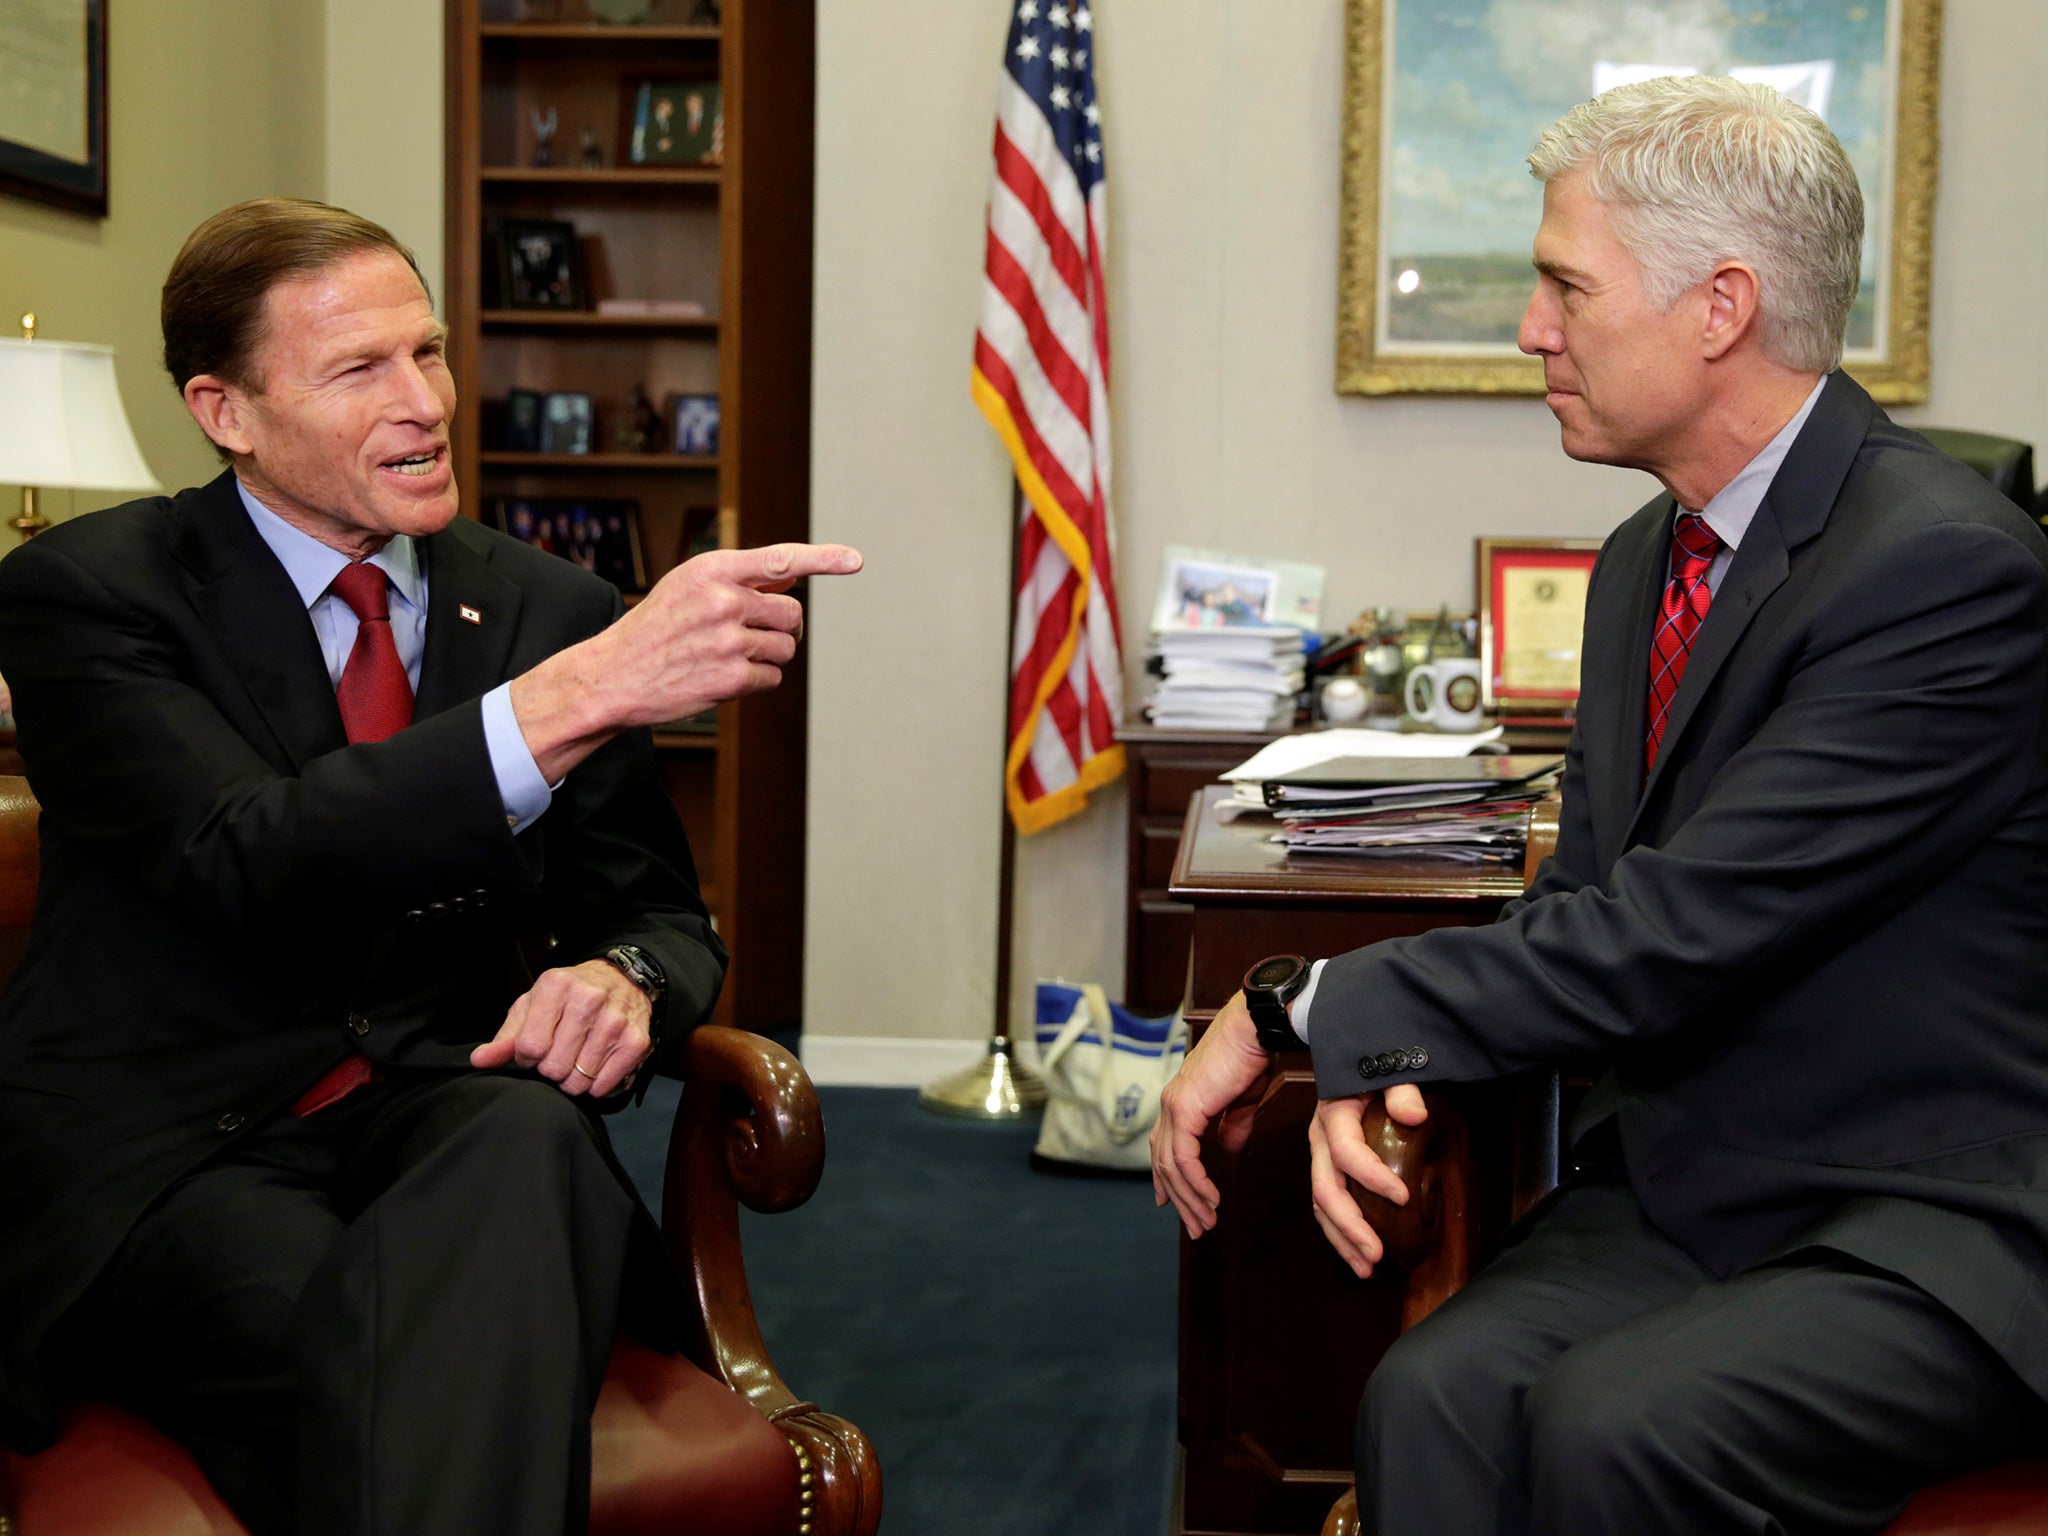 US Supreme Court nominee Judge Neil Gorsuch (right) meets with Senator Richard Blumenthal (D-CO) on Capitol Hill in Washington